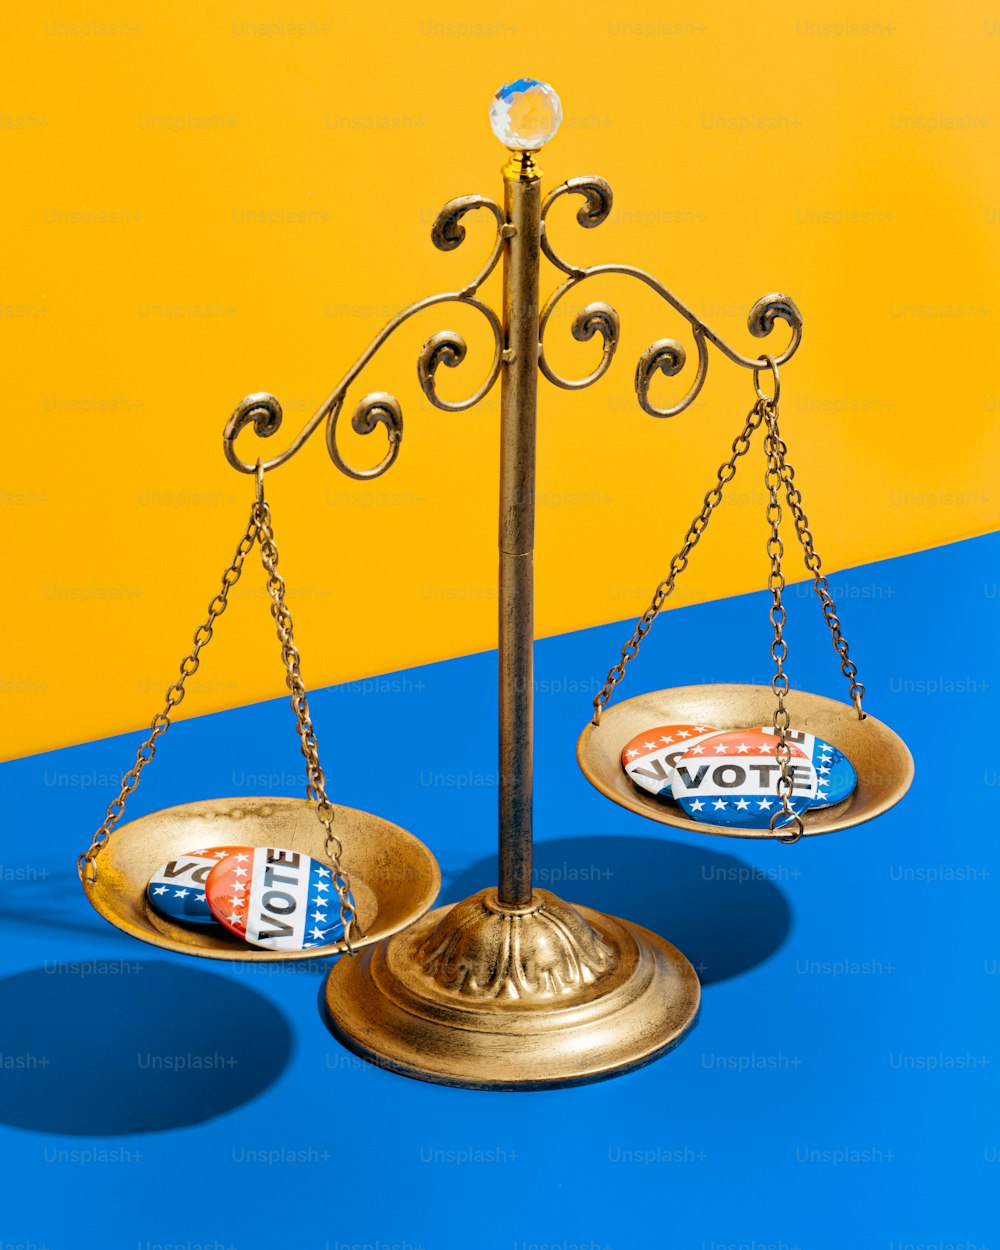 a golden scale with a pepsi logo on it